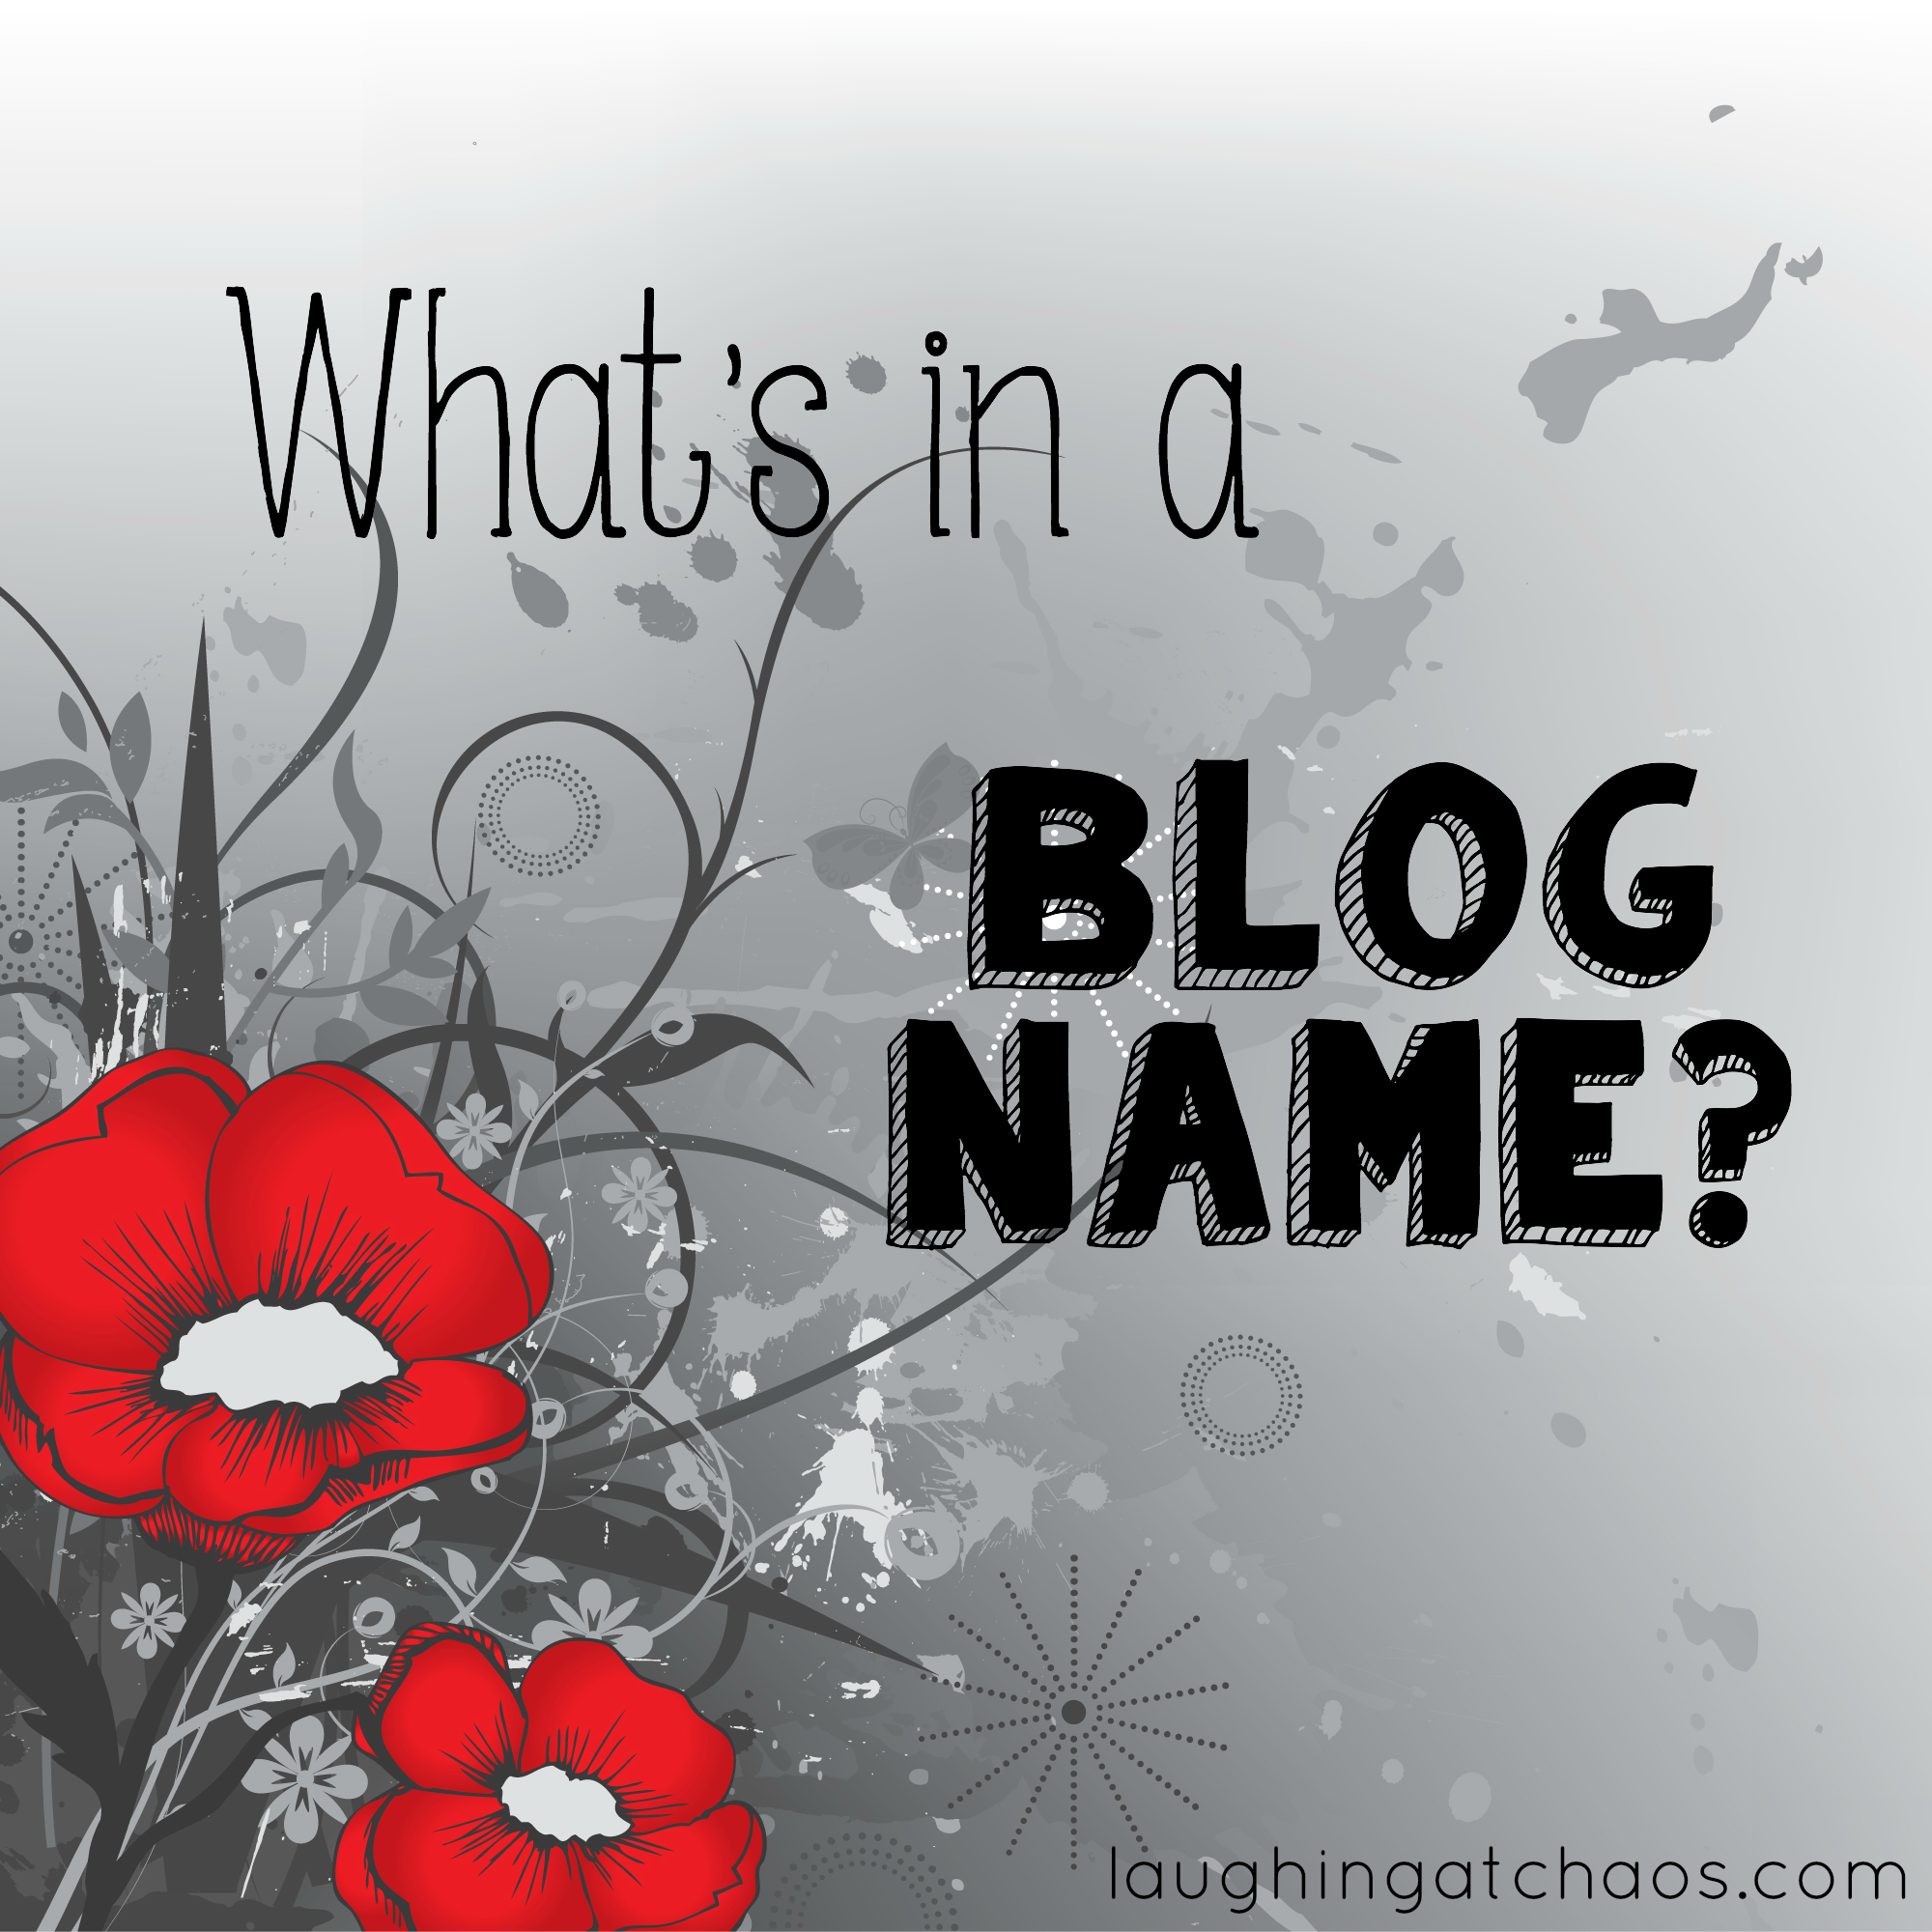 What’s in a blog name?